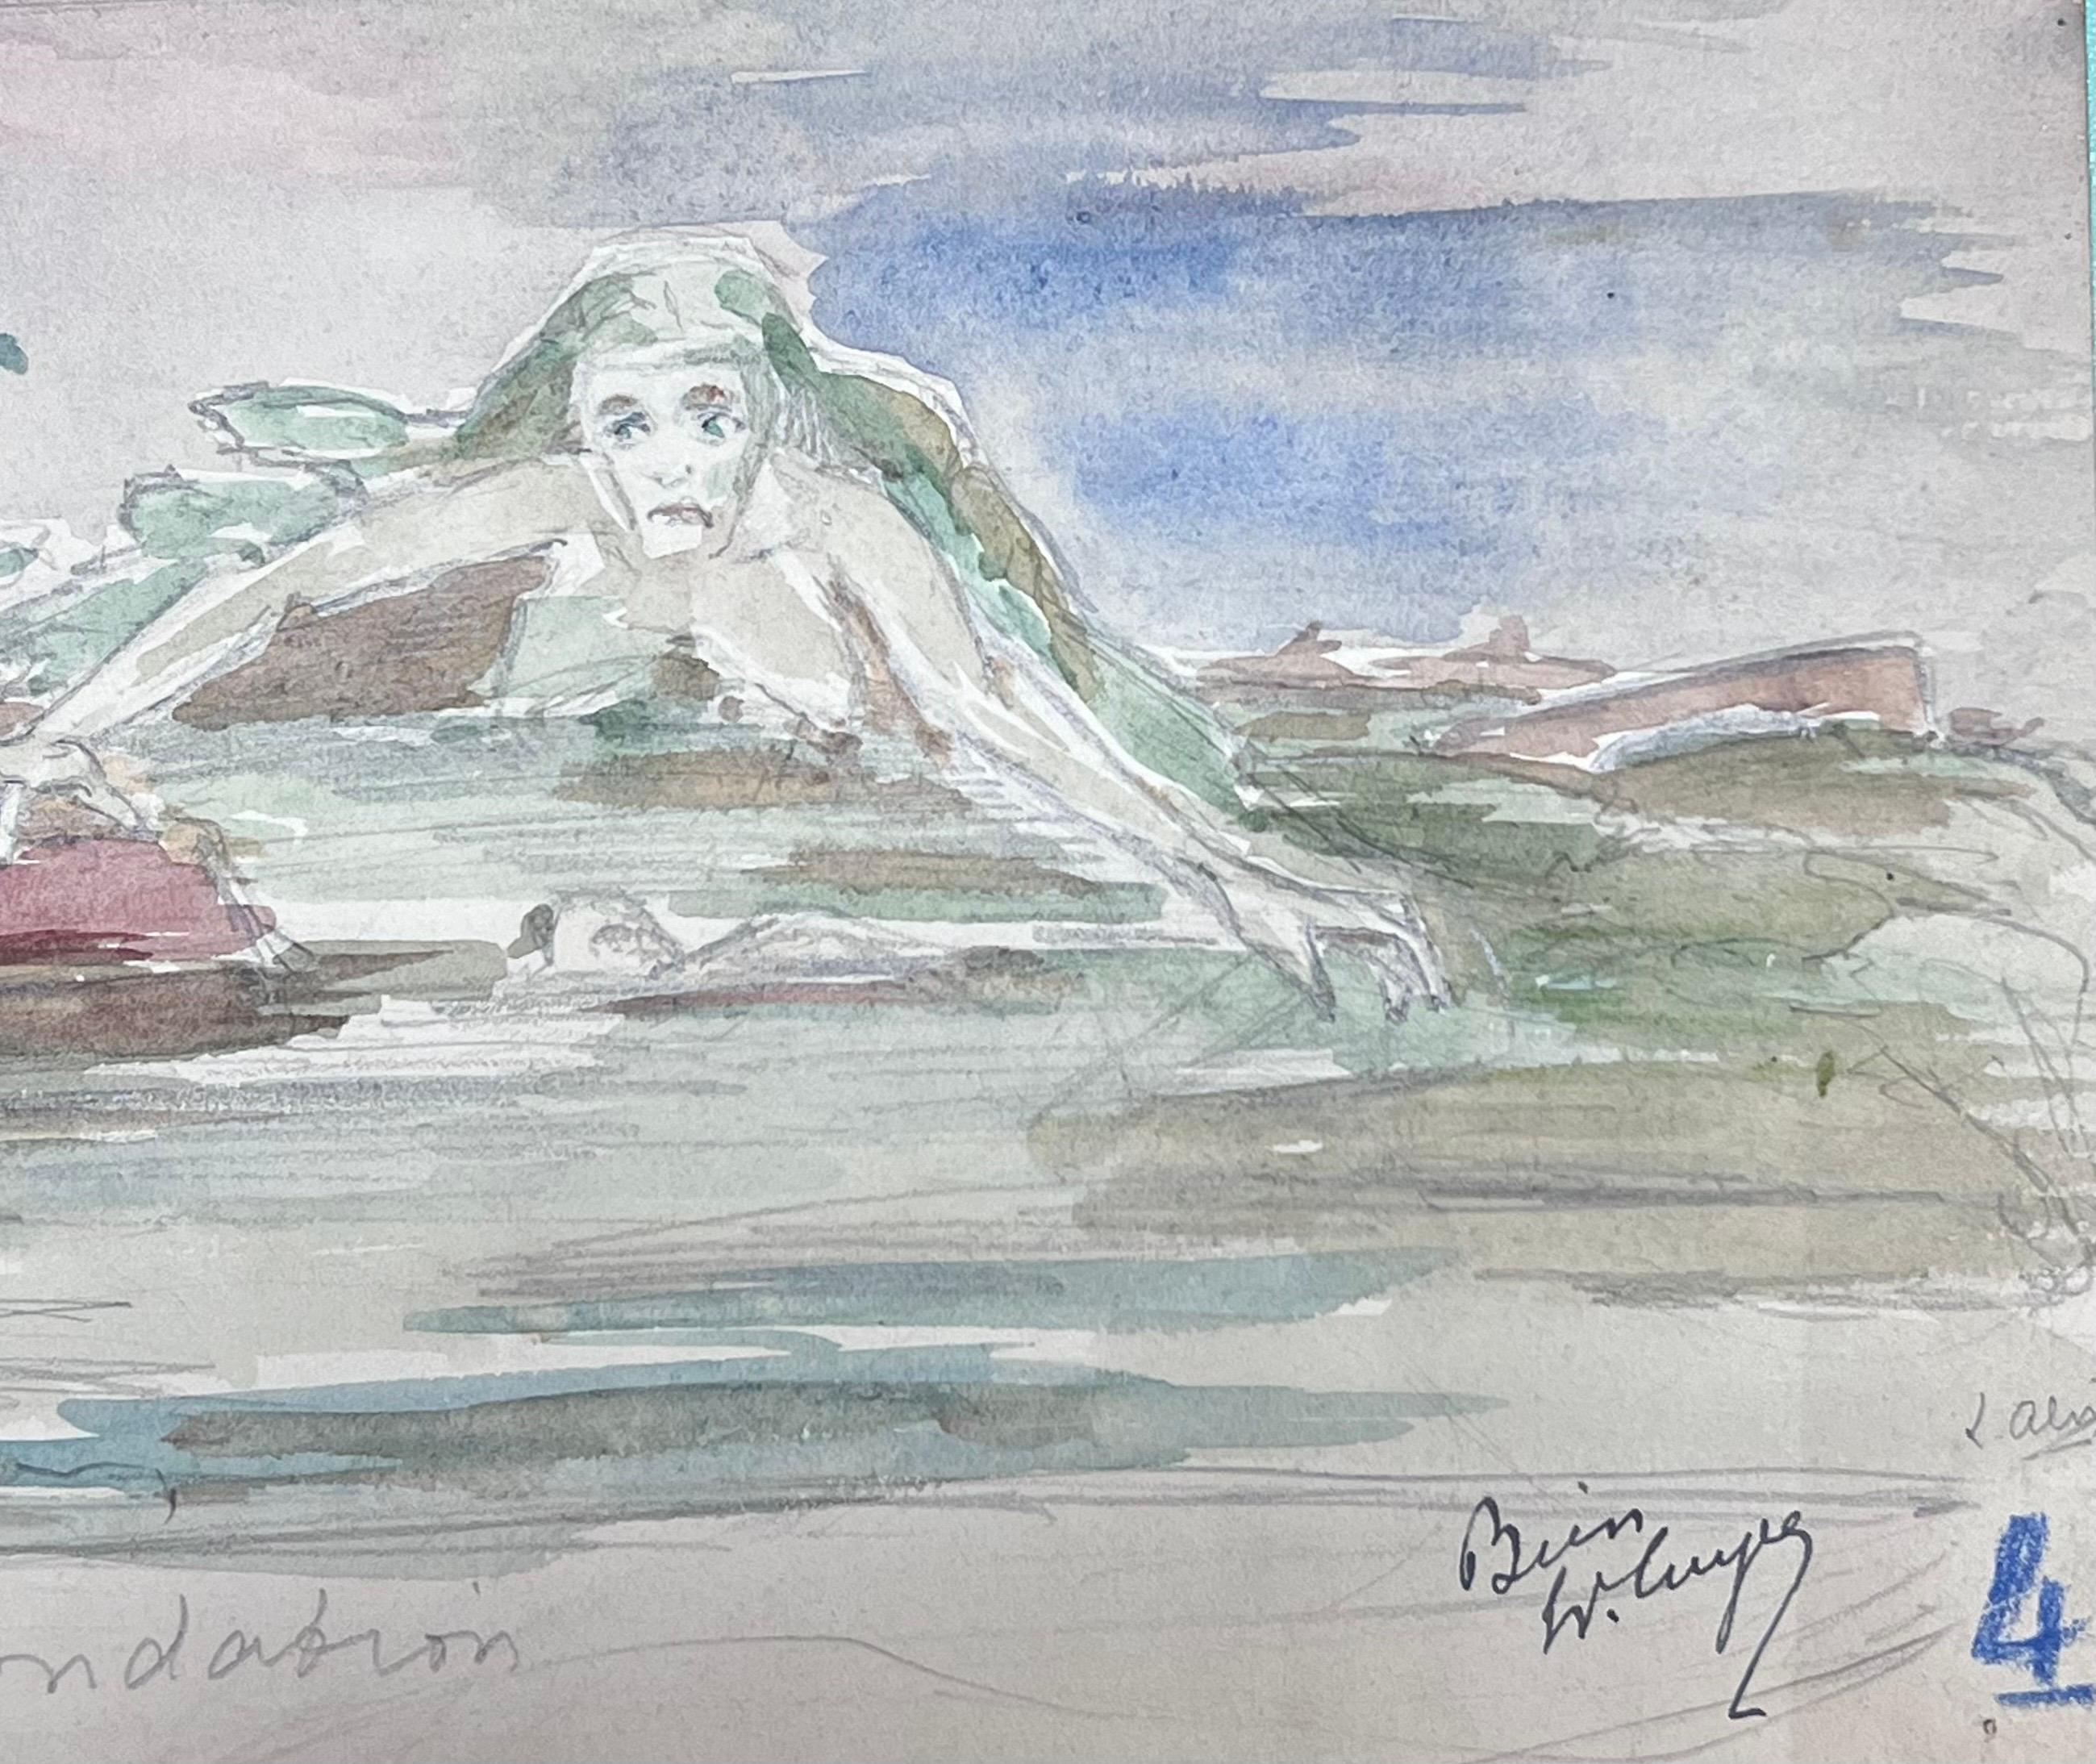 French Landscape
signed by Louise Alix (French, 1888-1980) *see notes below
provenance stamp to the back 
watercolour painting on artist paper, unframed
measures: 5.25 high by 10.75 inches wide
condition: overall very good and sound, a few scuffs